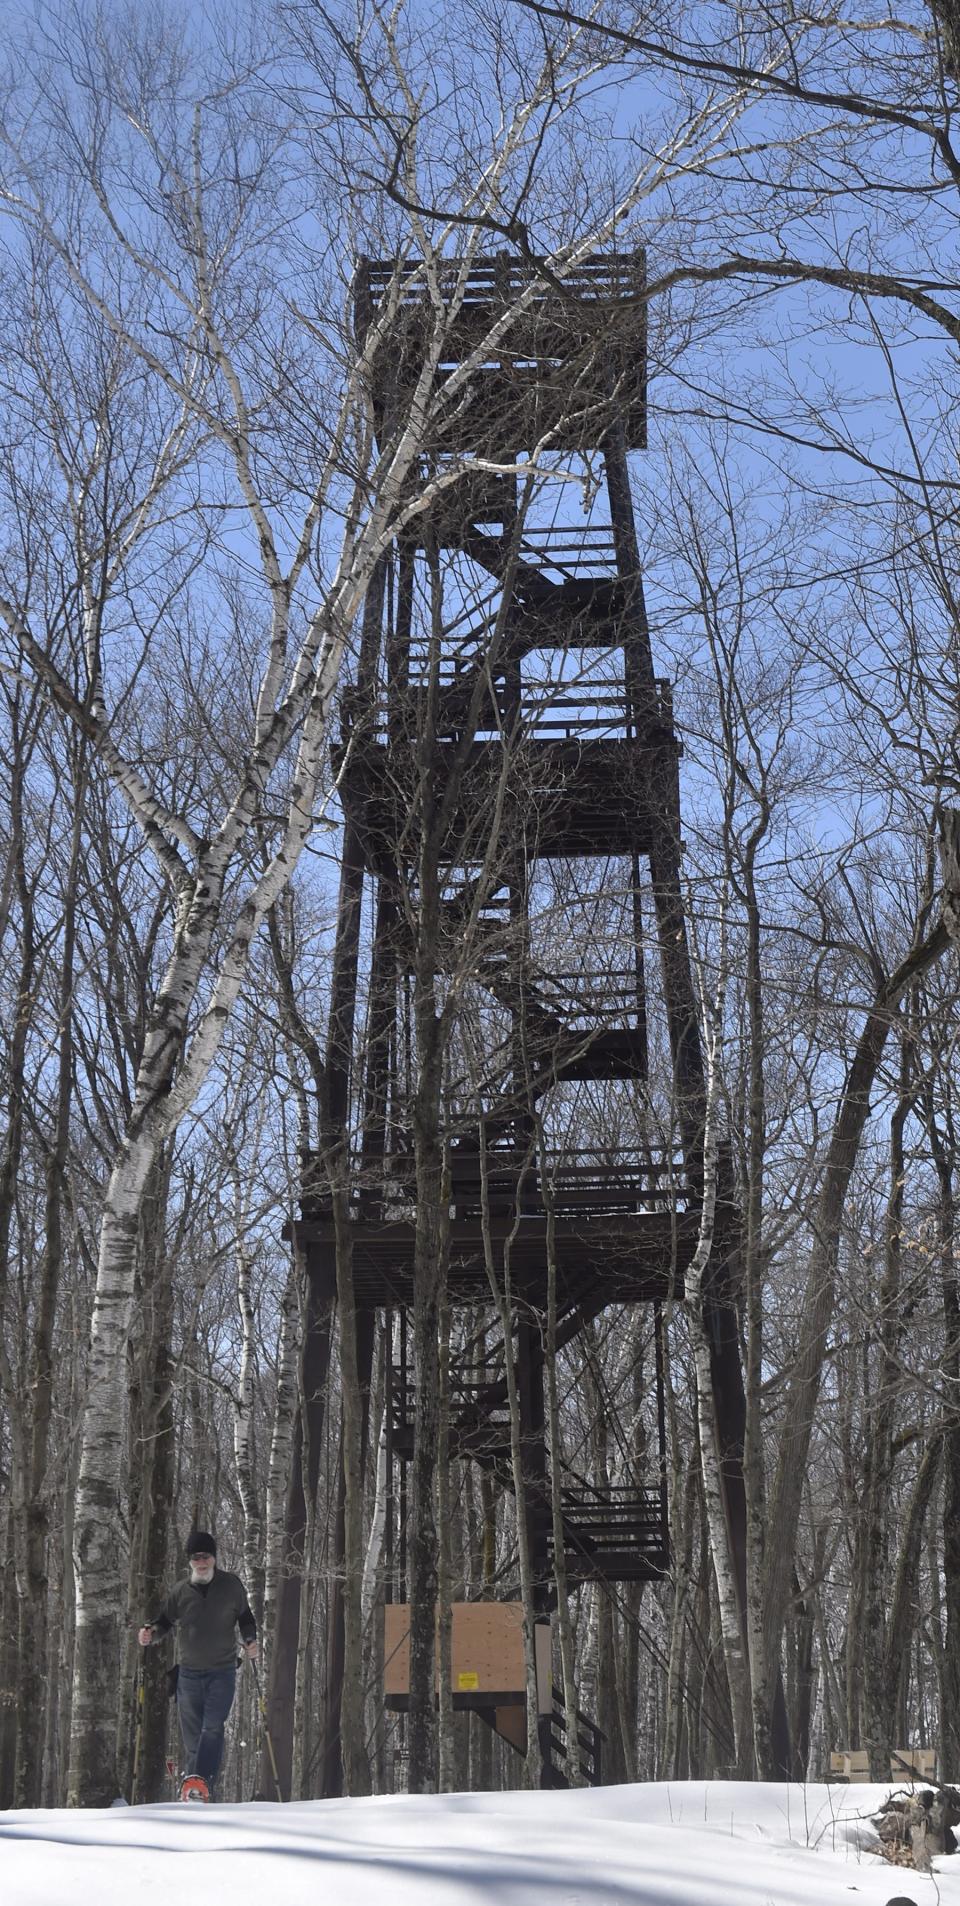 The 91-year-old Observation Tower at Potawatomi State Park in Sturgeon Bay was closed by the Wisconsin Department of Natural Resources in 2018 because of structural deficiencies. The DNR is considering options to restore or replace it while bringing it up to current building codes and accessibility requirements.